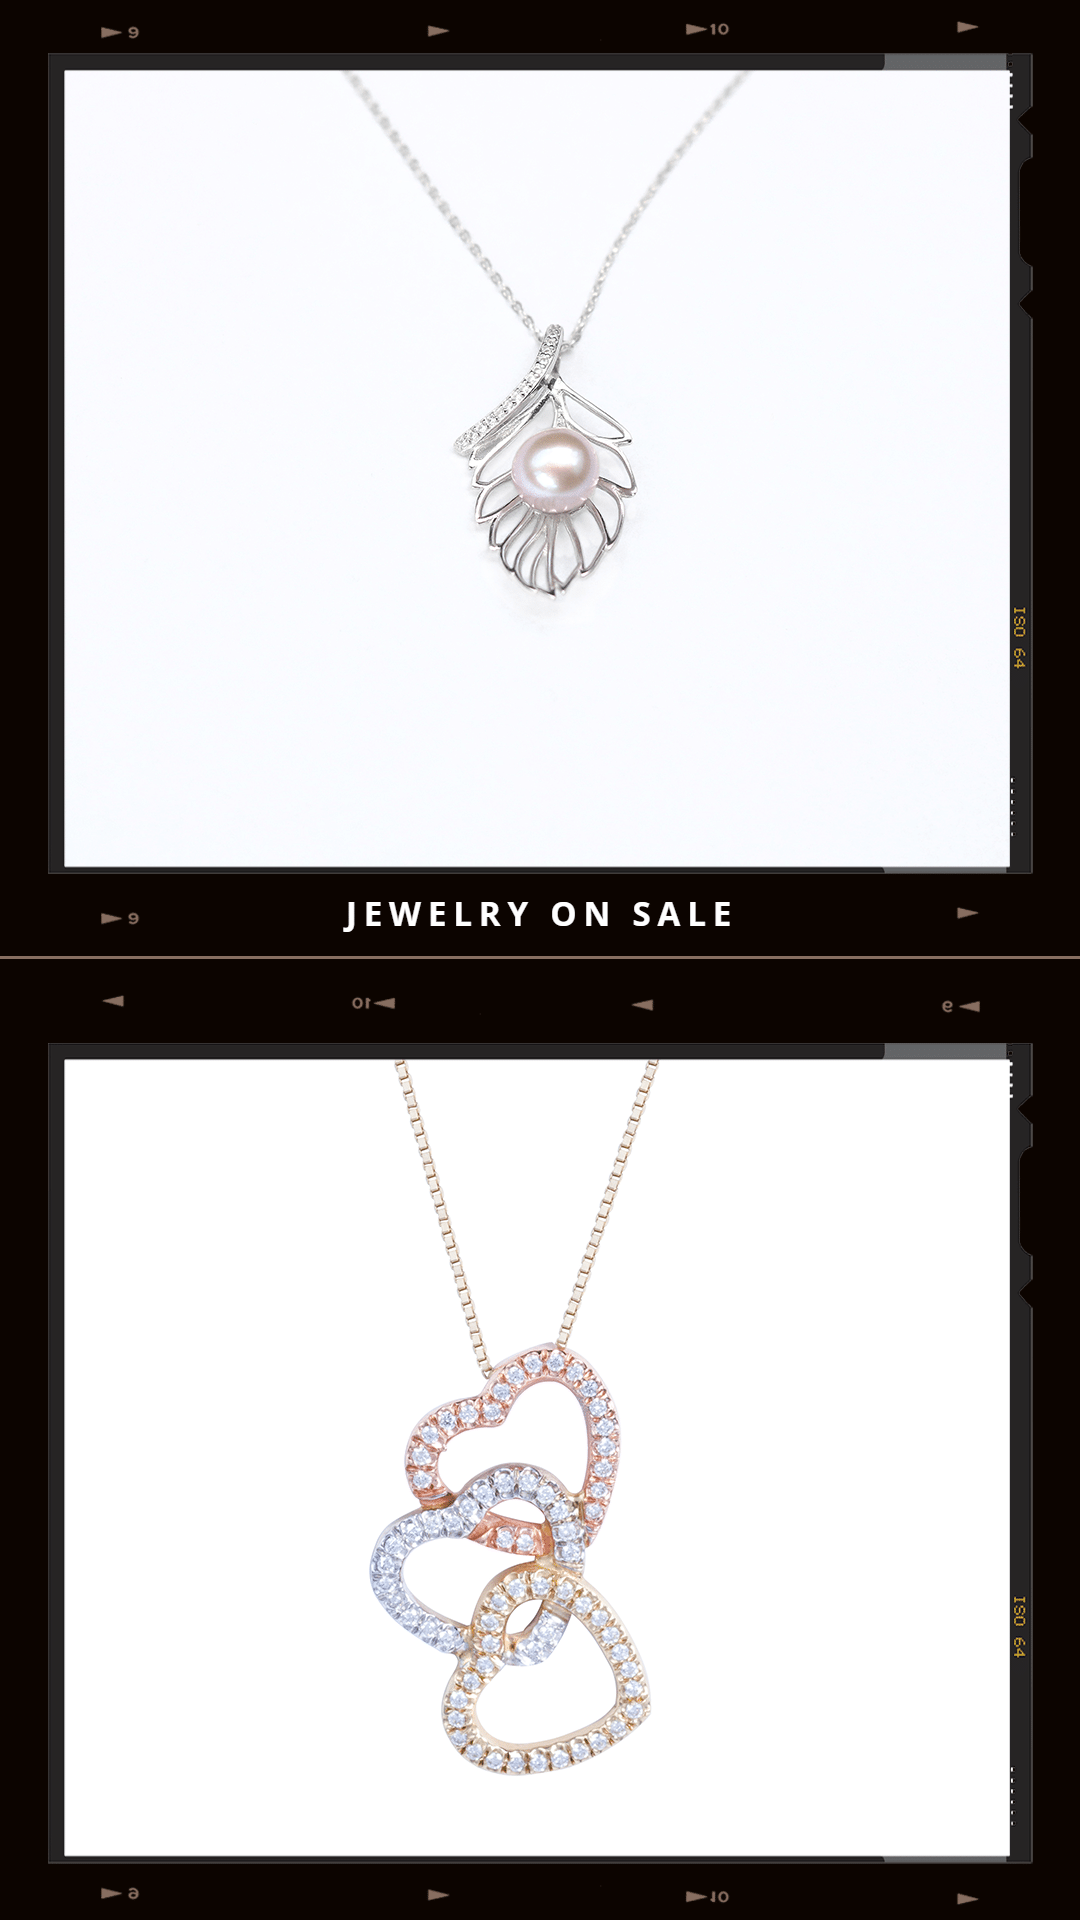 Gold Line Element Literary Style Jewelry Necklaces Display Ecommerce Story预览效果